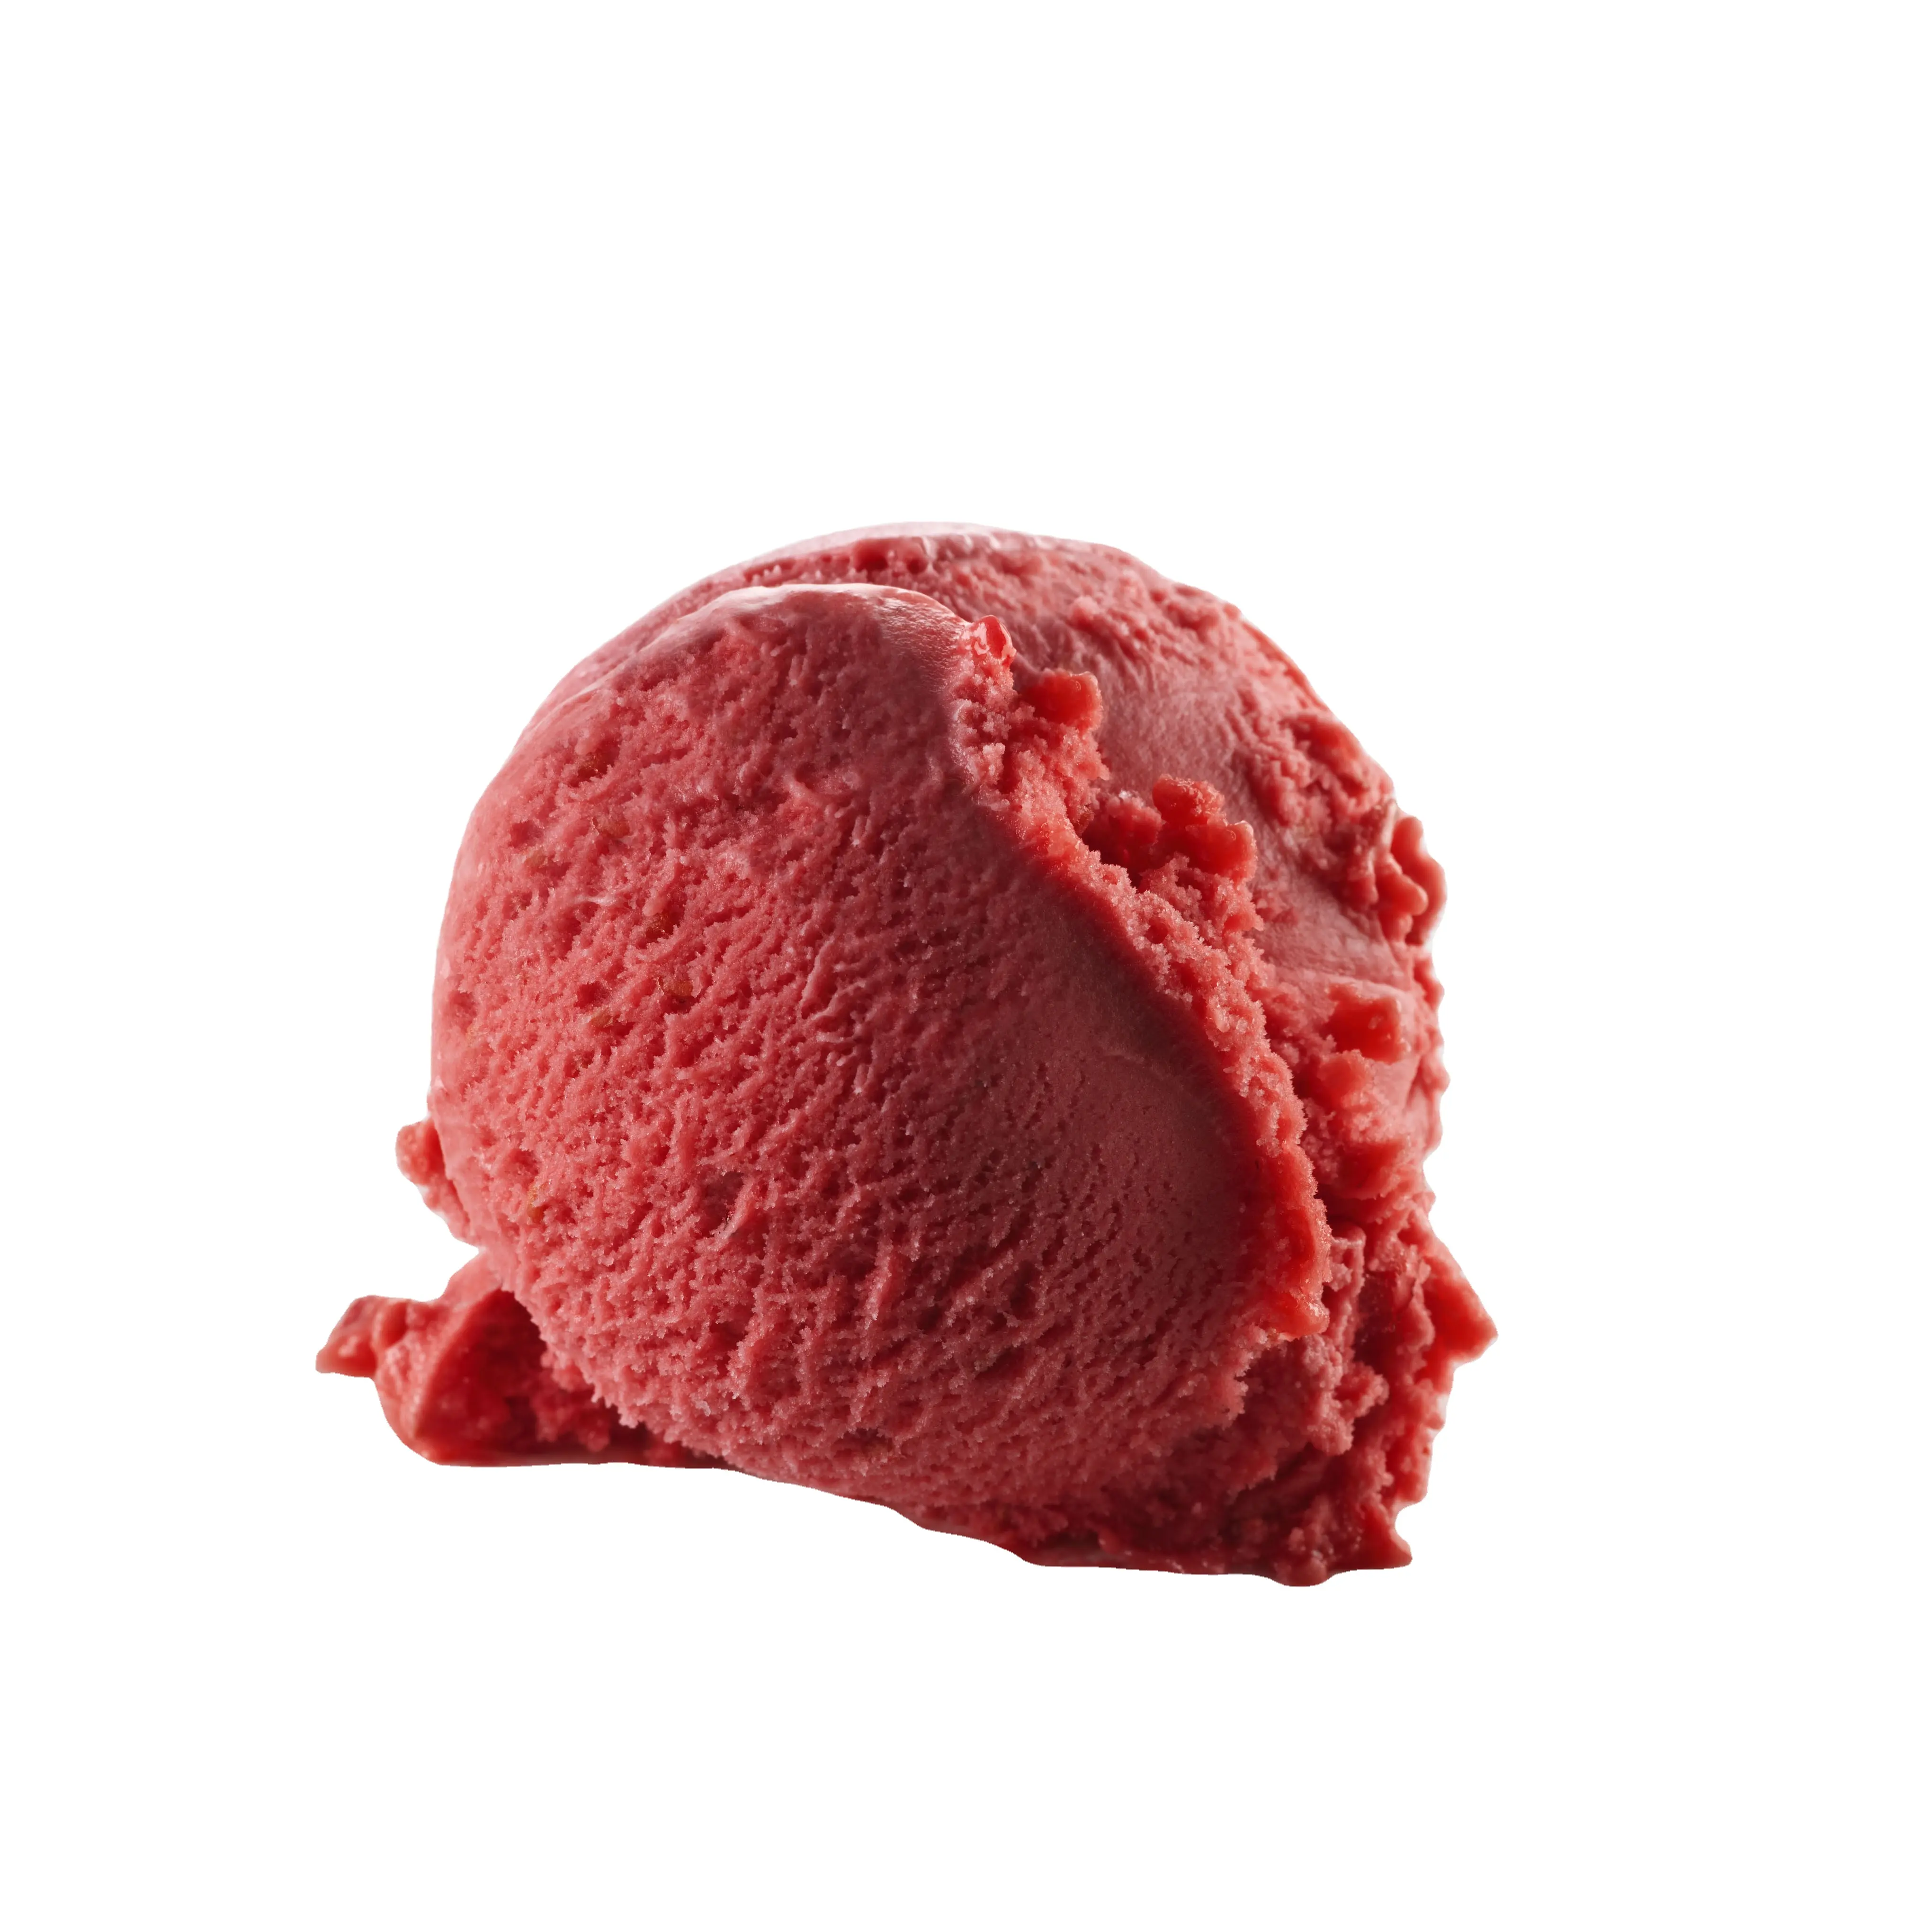 American Grape Ice cream - Sorbet - Made in Italy - 2.5Lt tub - for HORECA - suitable for vegan - ready to serve